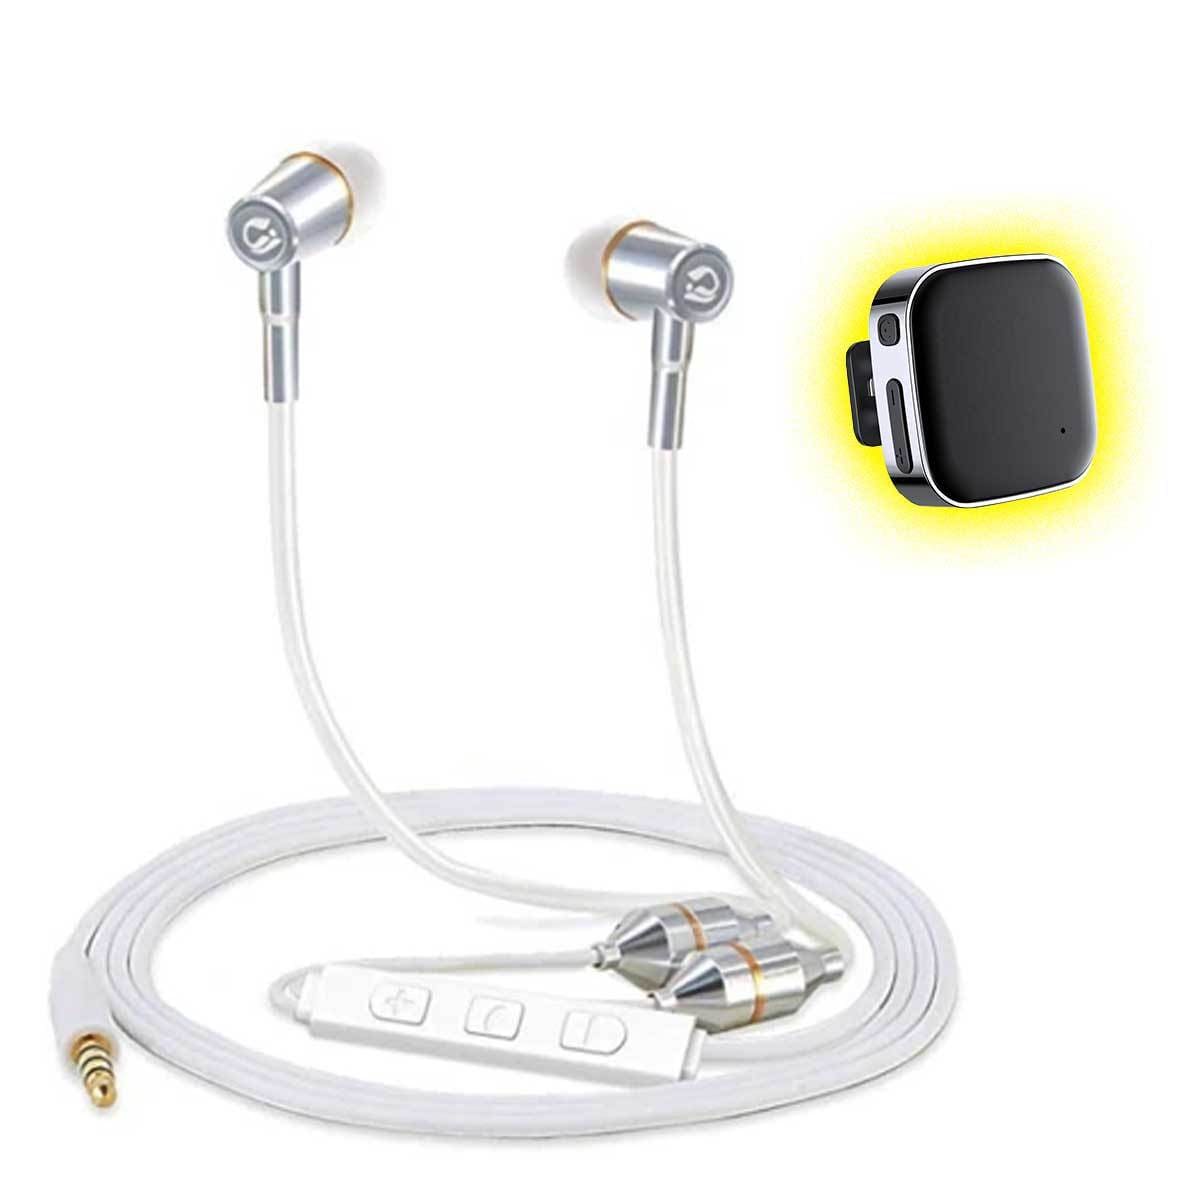 EMF Blocking, Radiation Protection Headphones/Ear Buds - Air Tube Technology Conners Clinic Equipment White Earbud Headphones + Bluetooth Adapter - Conners Clinic